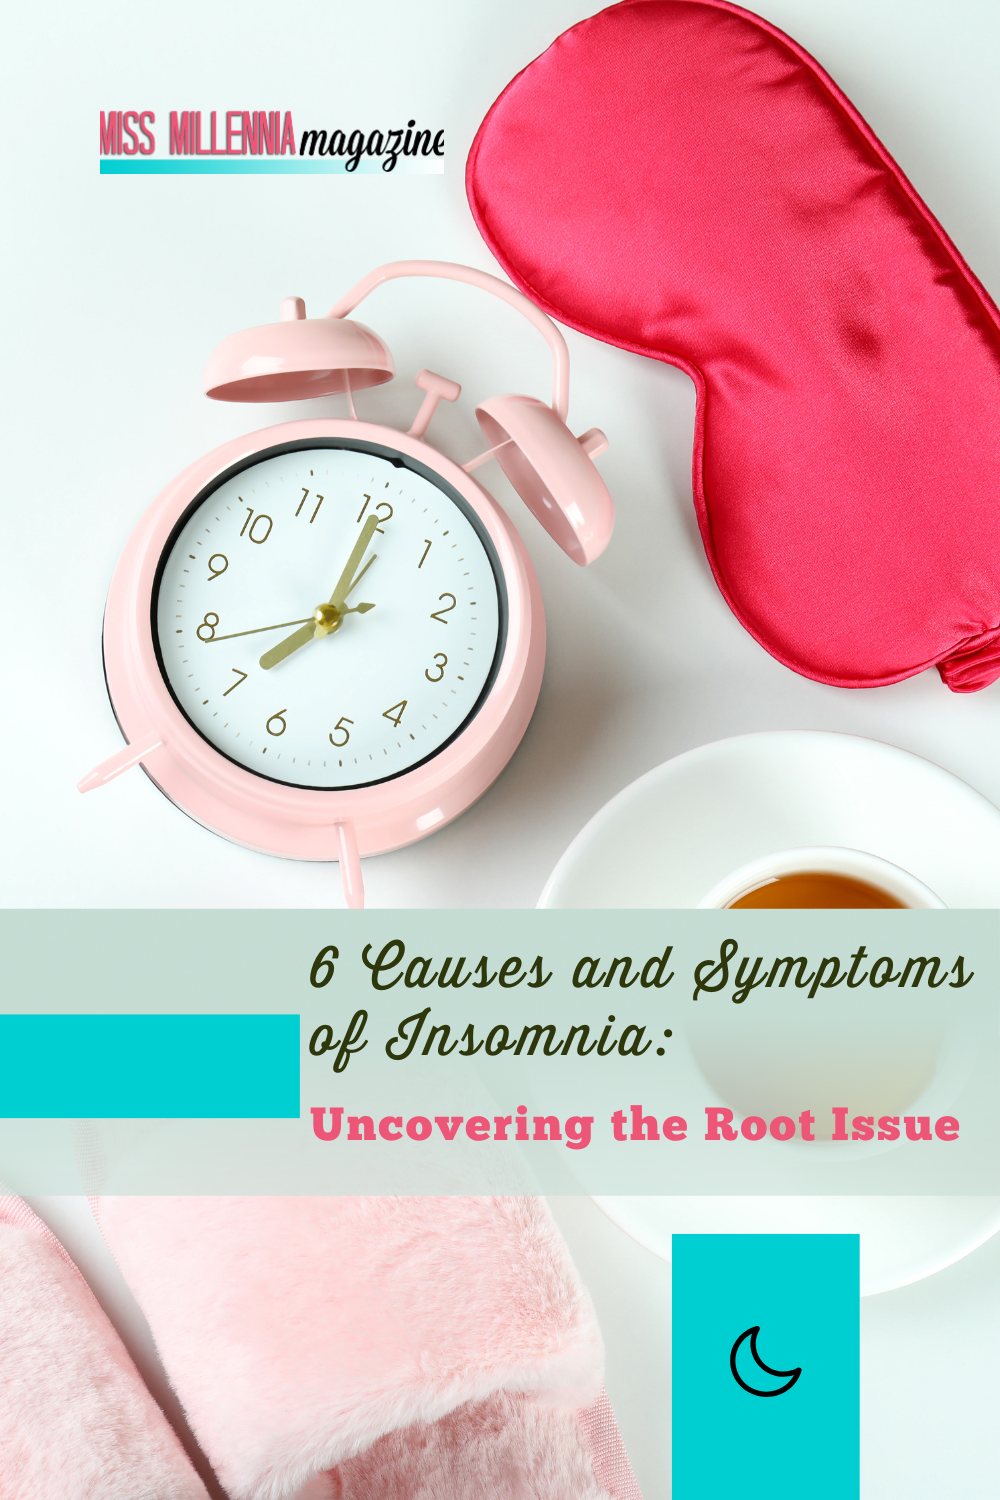 Six Causes and Symptoms of Insomnia: Uncovering the Root Issue